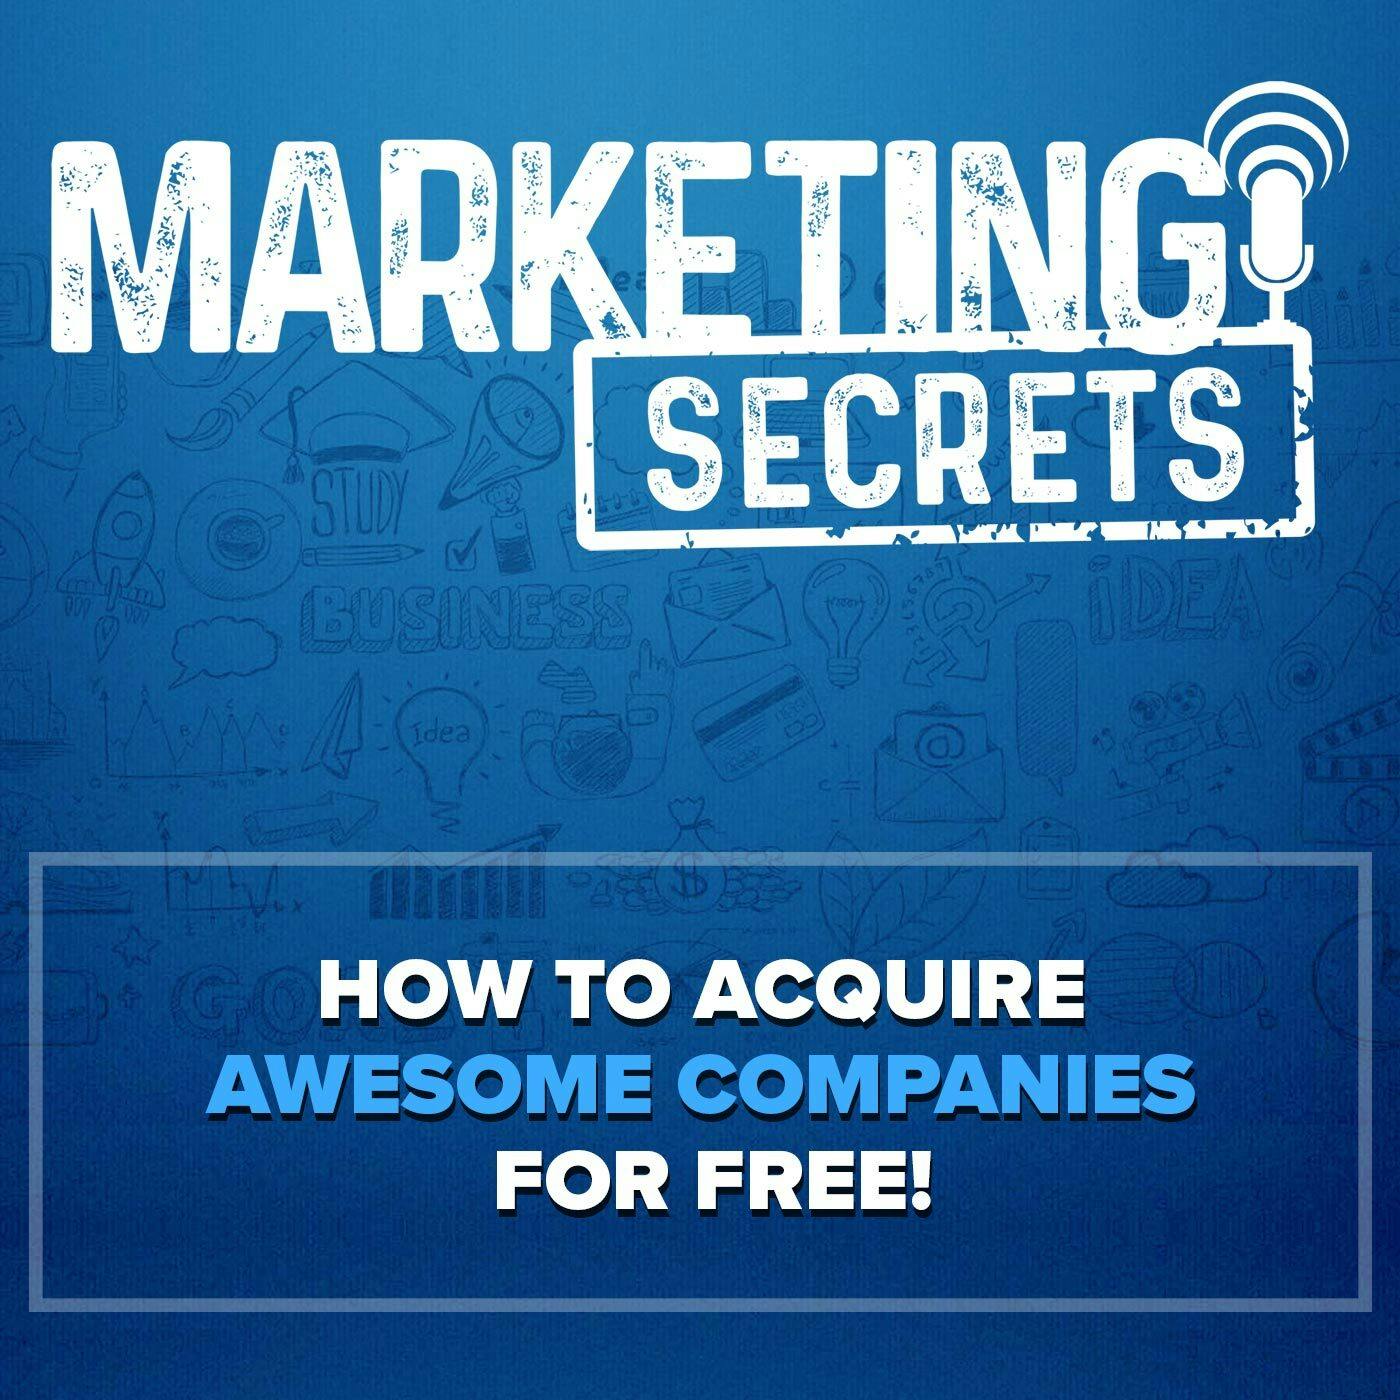 How To Acquire Awesome Companies For FREE!